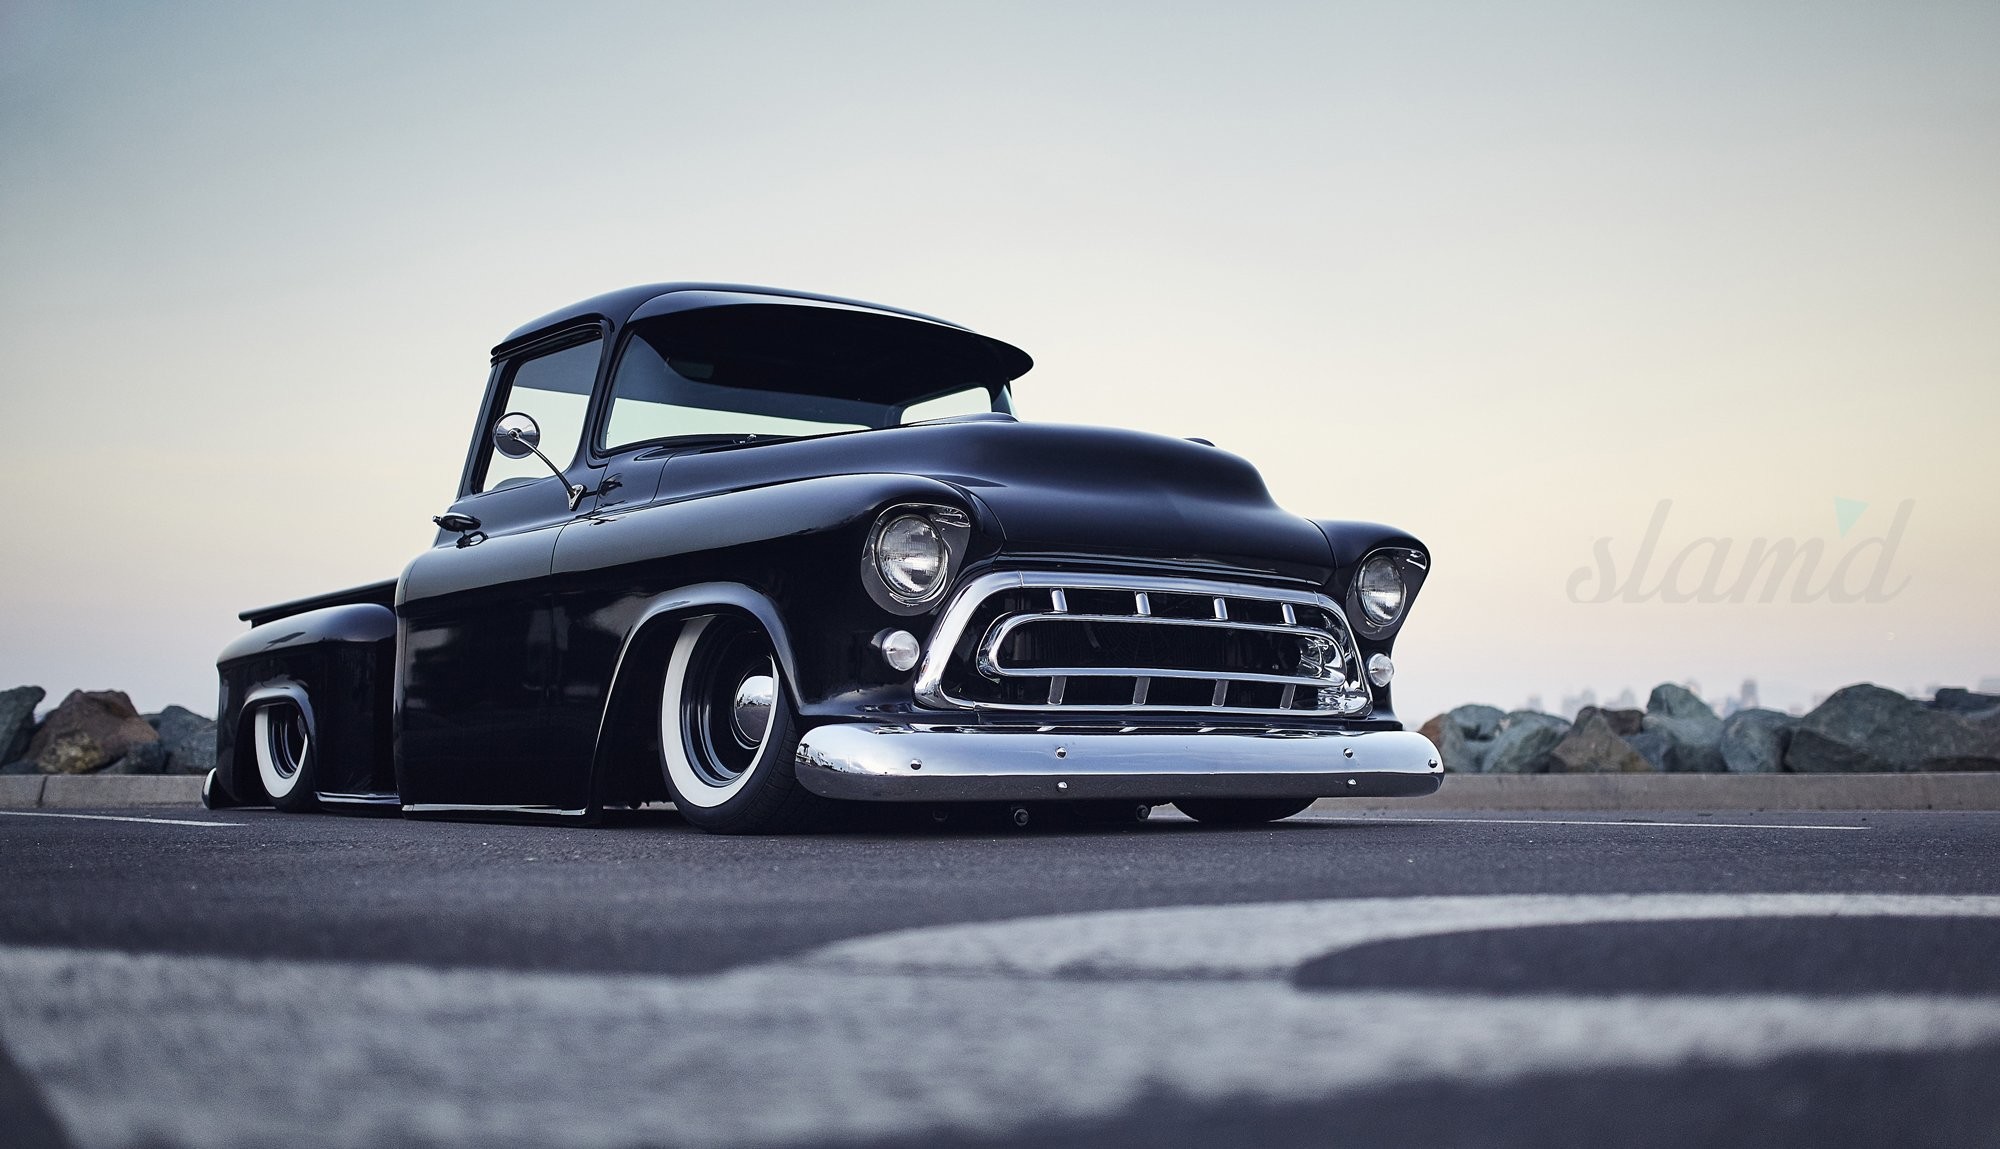 2000x1149 Collection of Chevy Truck Wallpapers on HDWallpapers